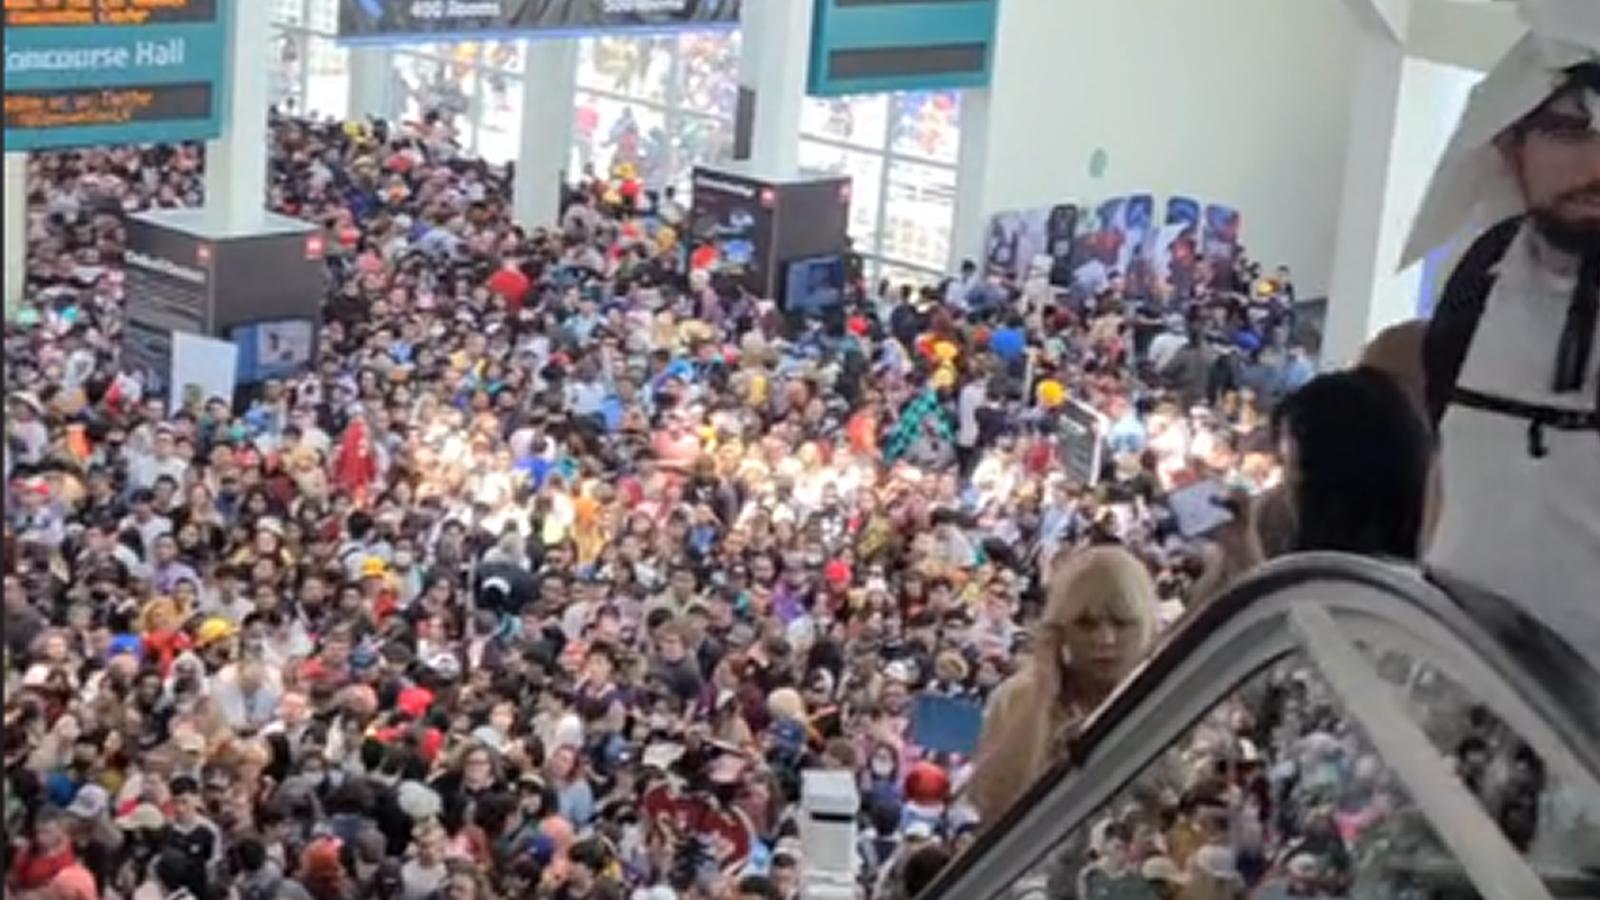 Anime Expo in LA called out as a safety hazard due to massive crowding